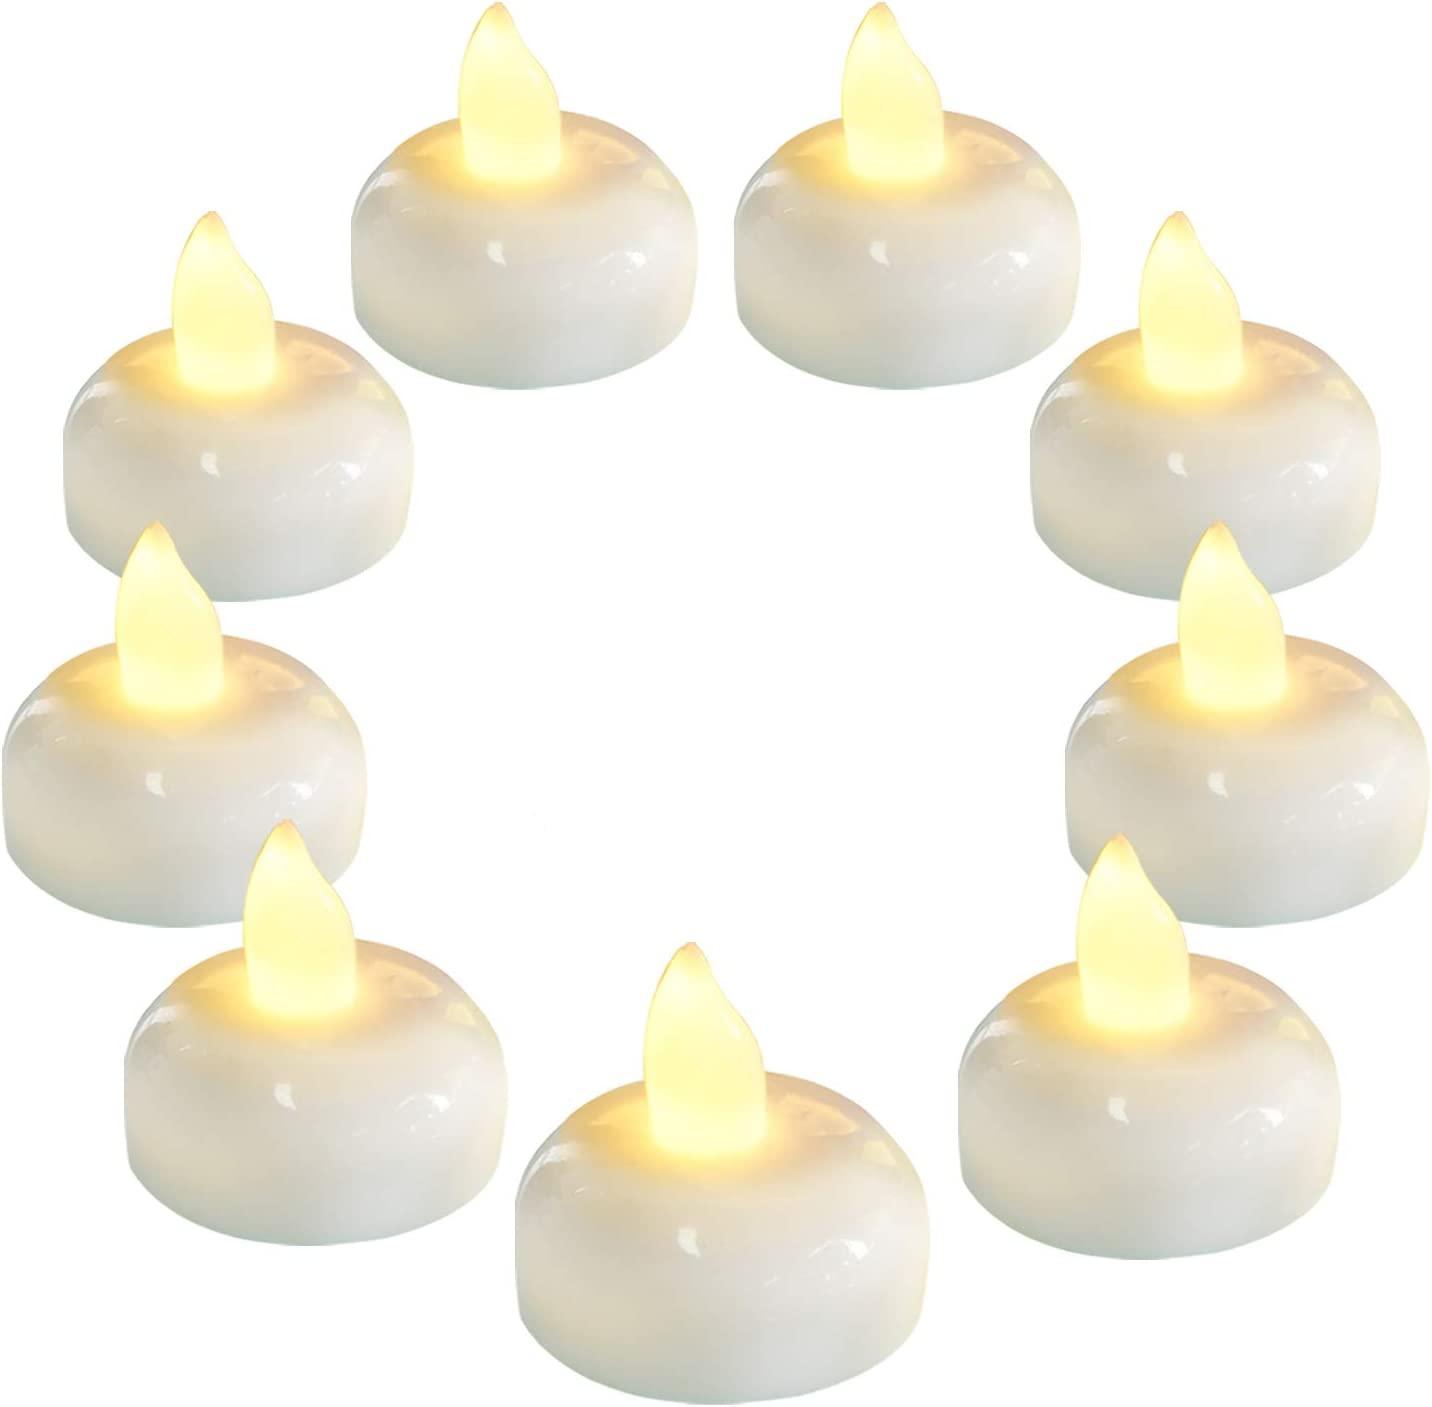 24pcs Waterproof Flameless Floating Tealights, Warm White Battery Flickering LED Tea Lights Candles - Decotree.co Online Shop